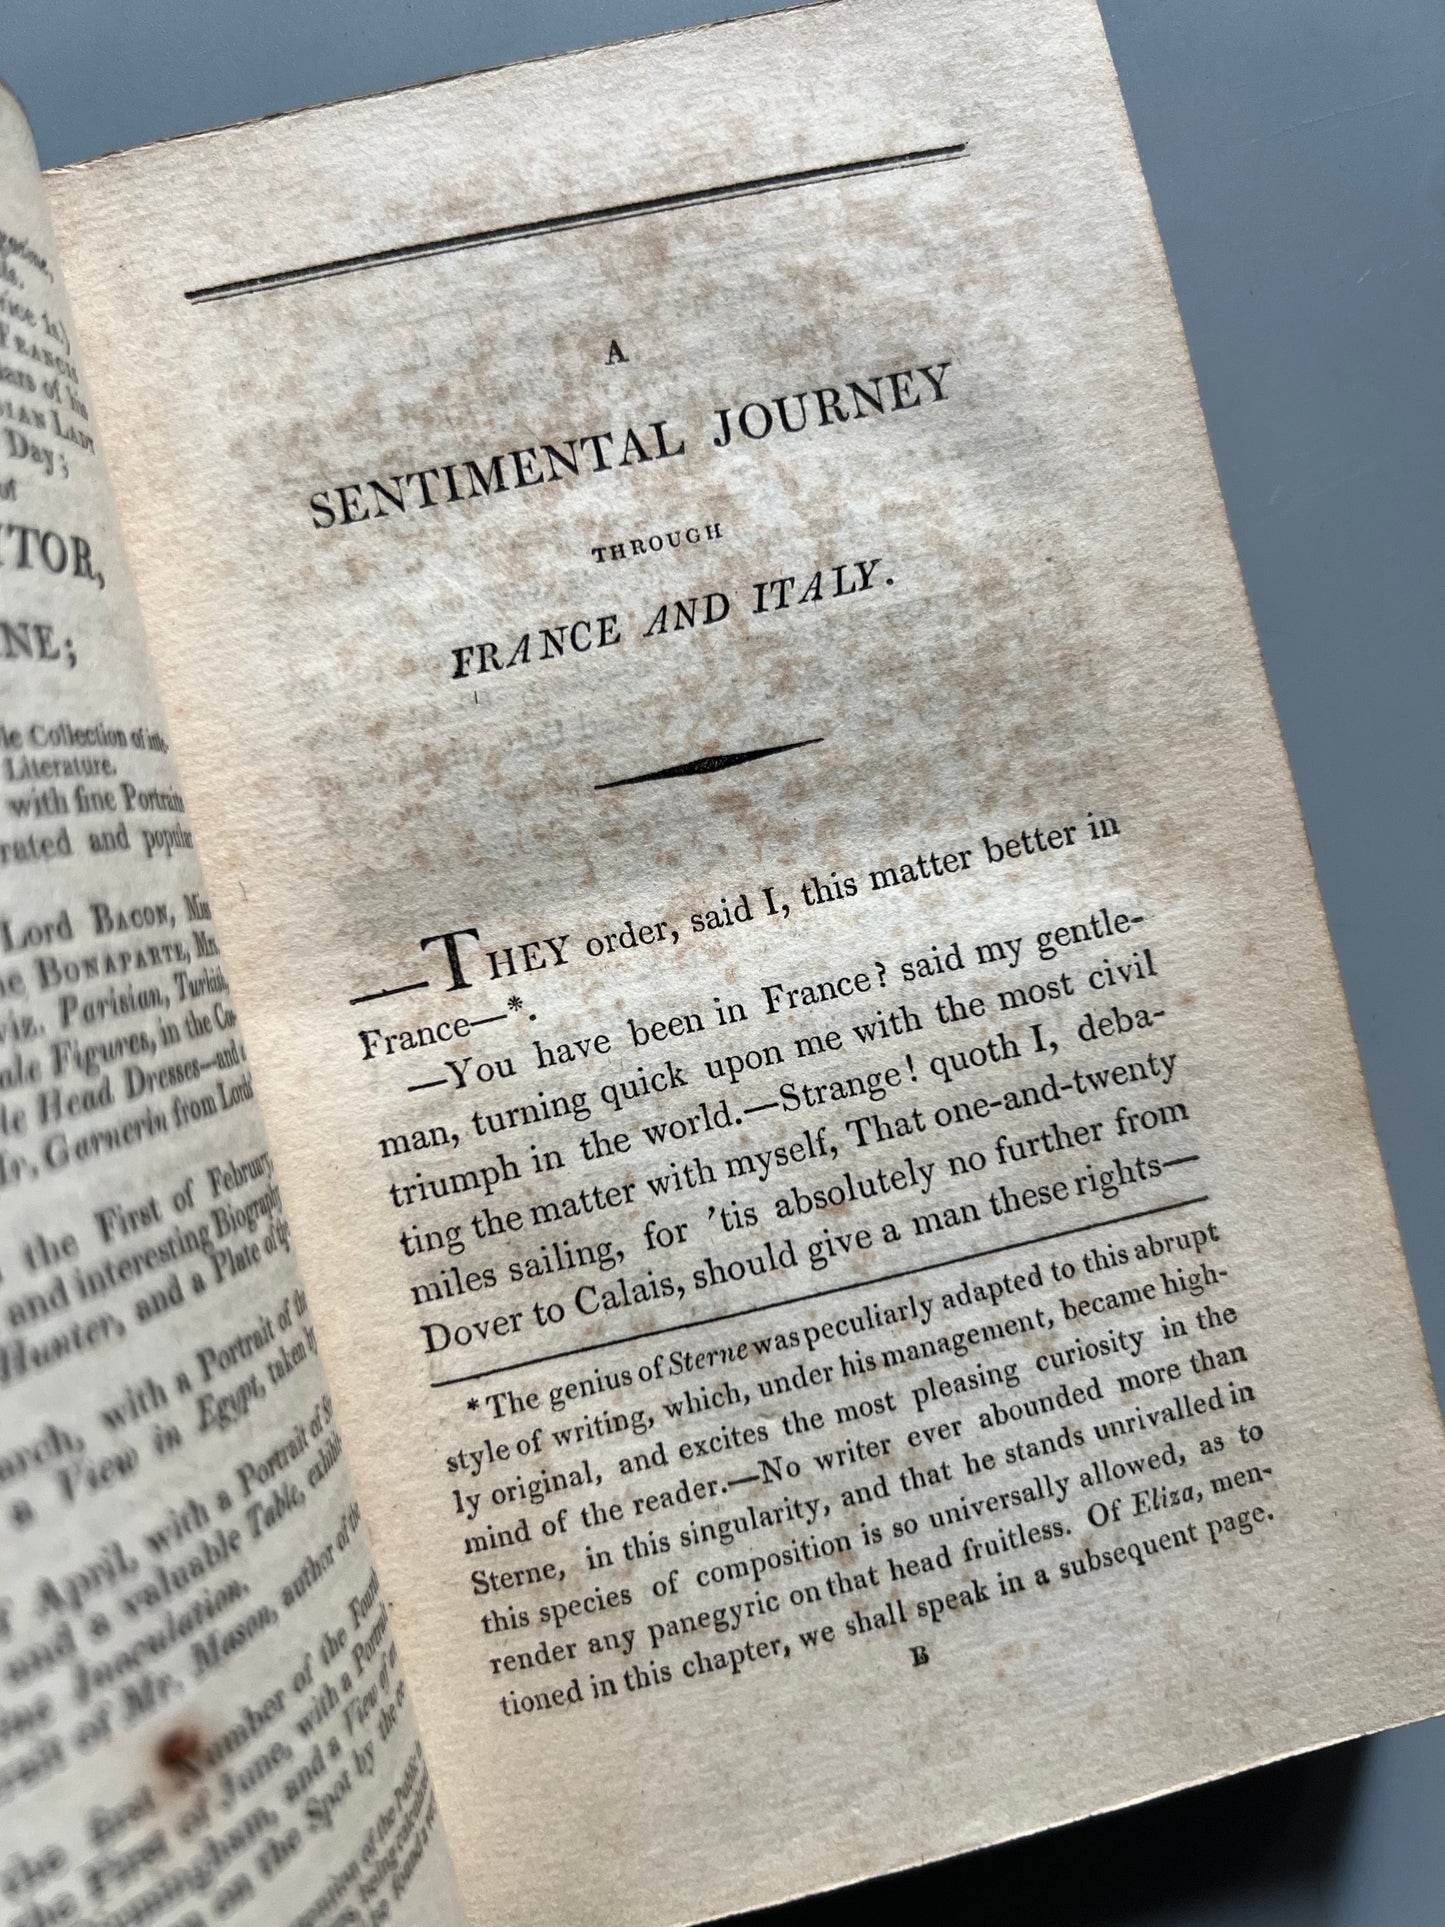 A sentimental journey through France and Italy, Laurence Sterne - Londres, 1803